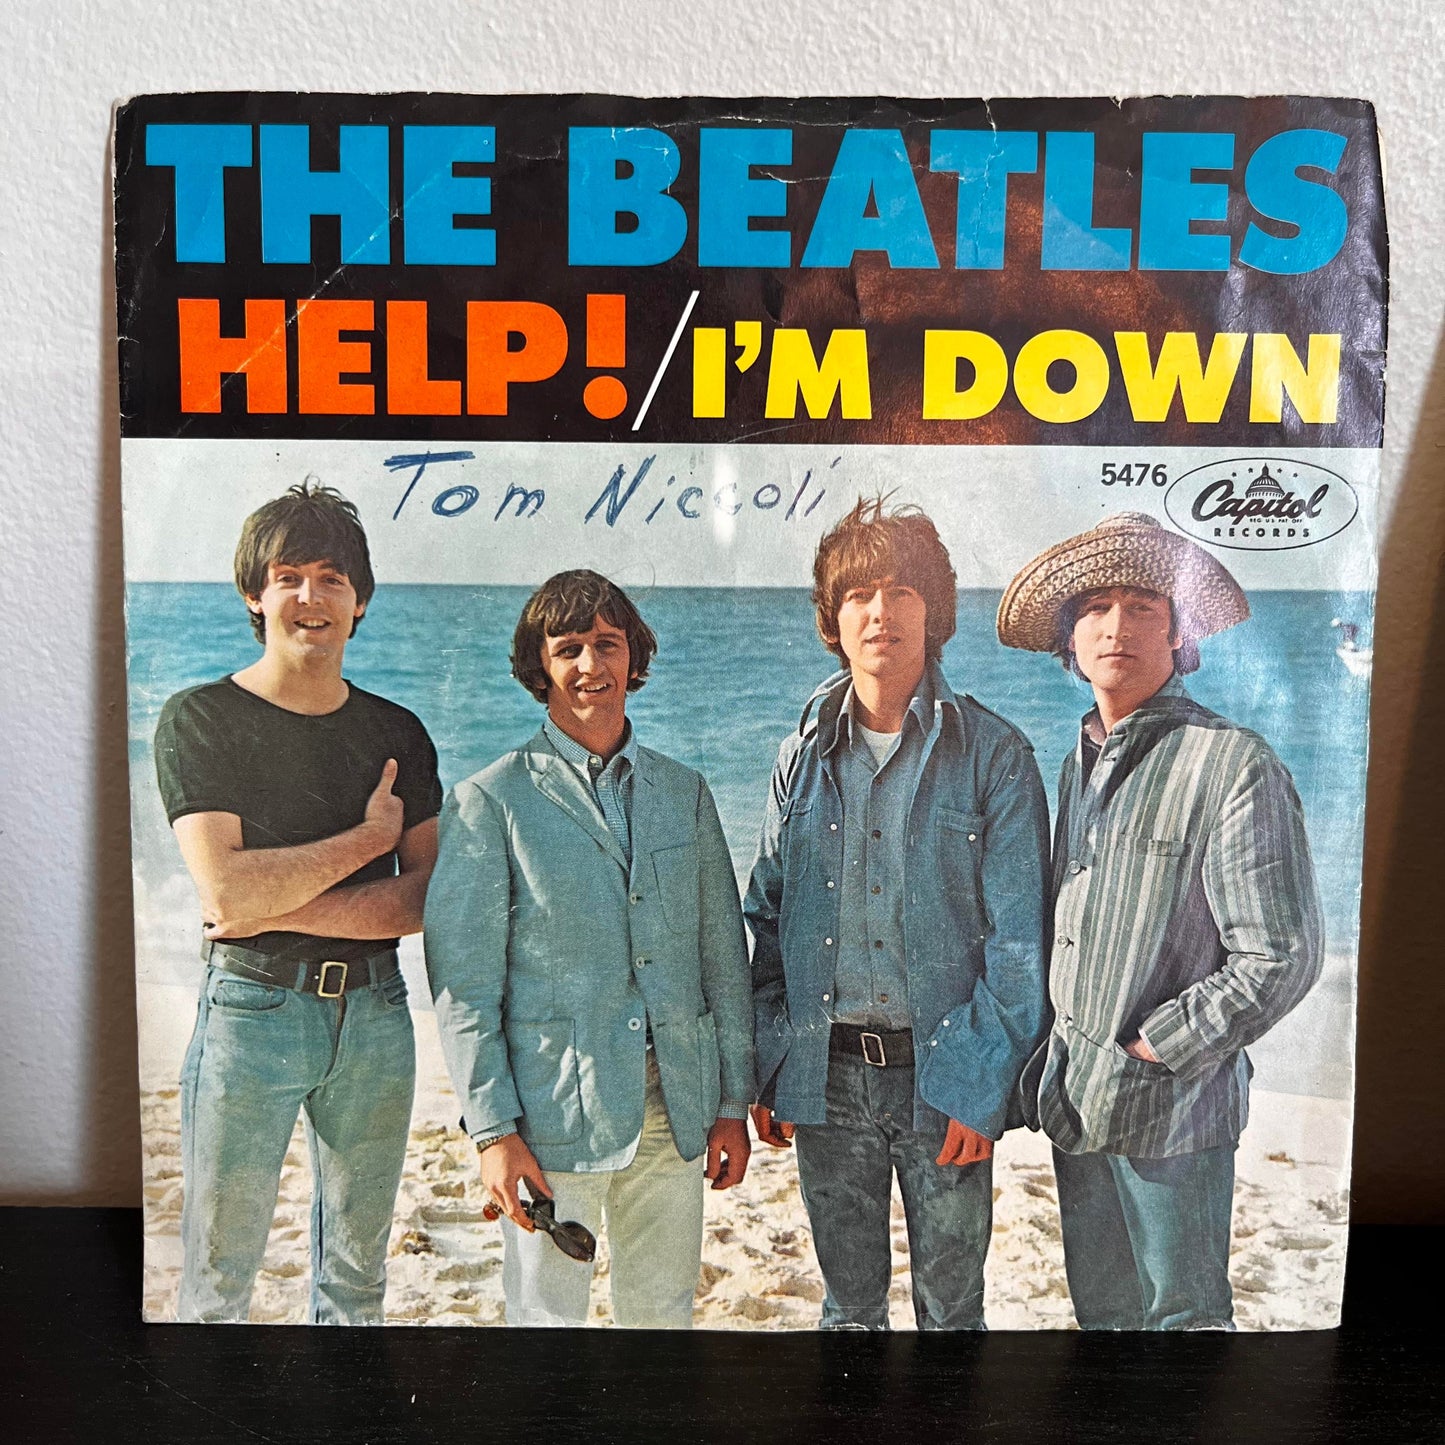 The Beatles Help!/I'm Down 7" 45RPM Vinyl Capitol 5476 With Sleeve VG+